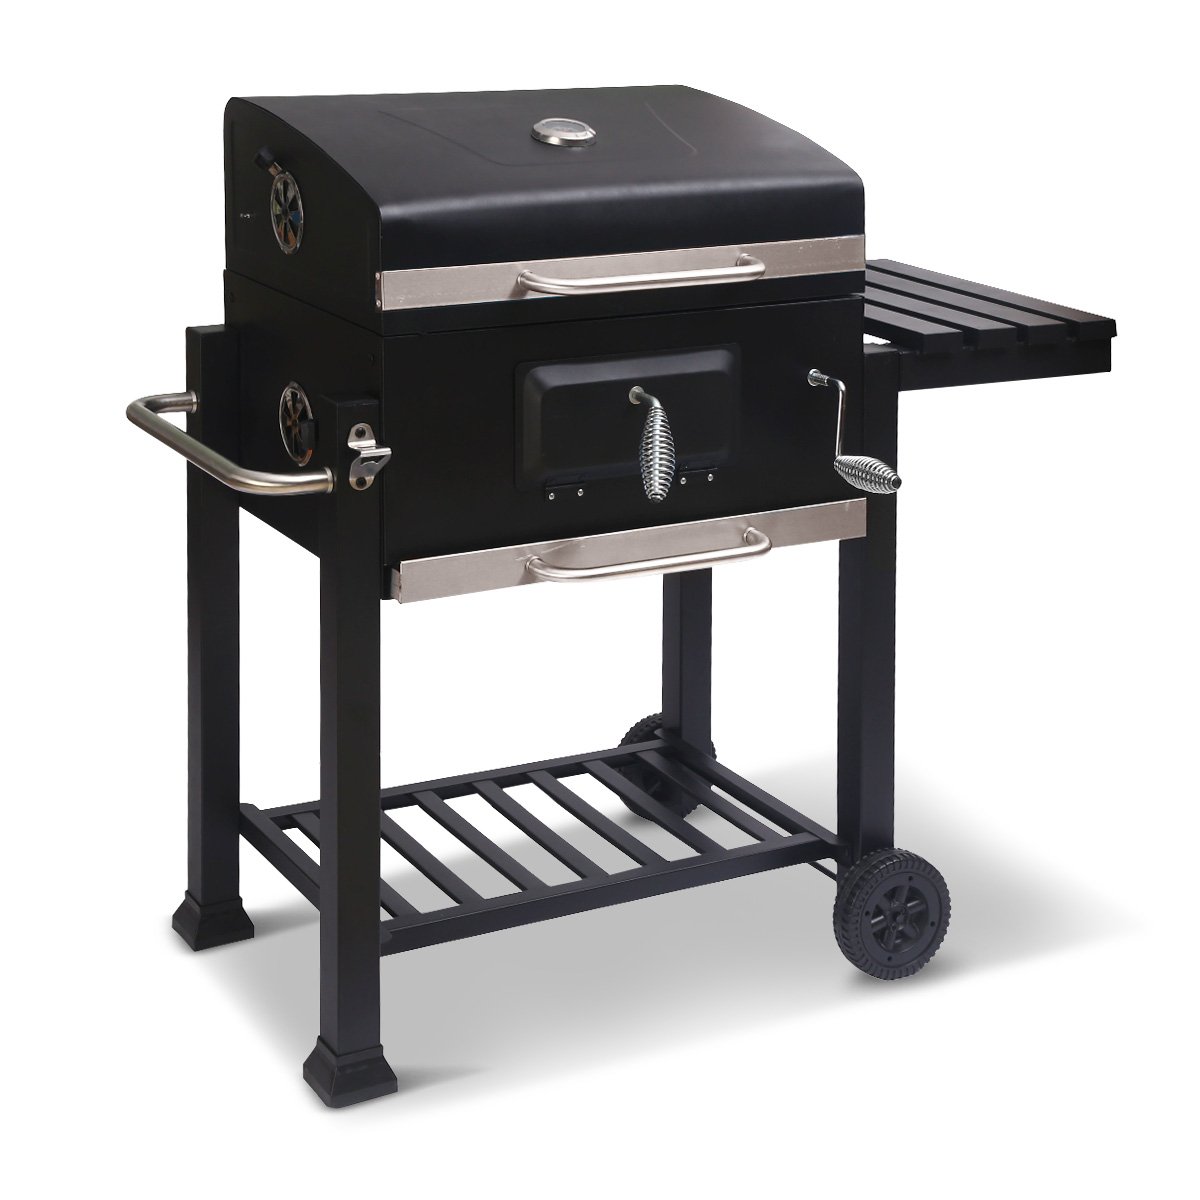 Wallaroo Square Outdoor Barbecue Grill BBQ - SILBERSHELL